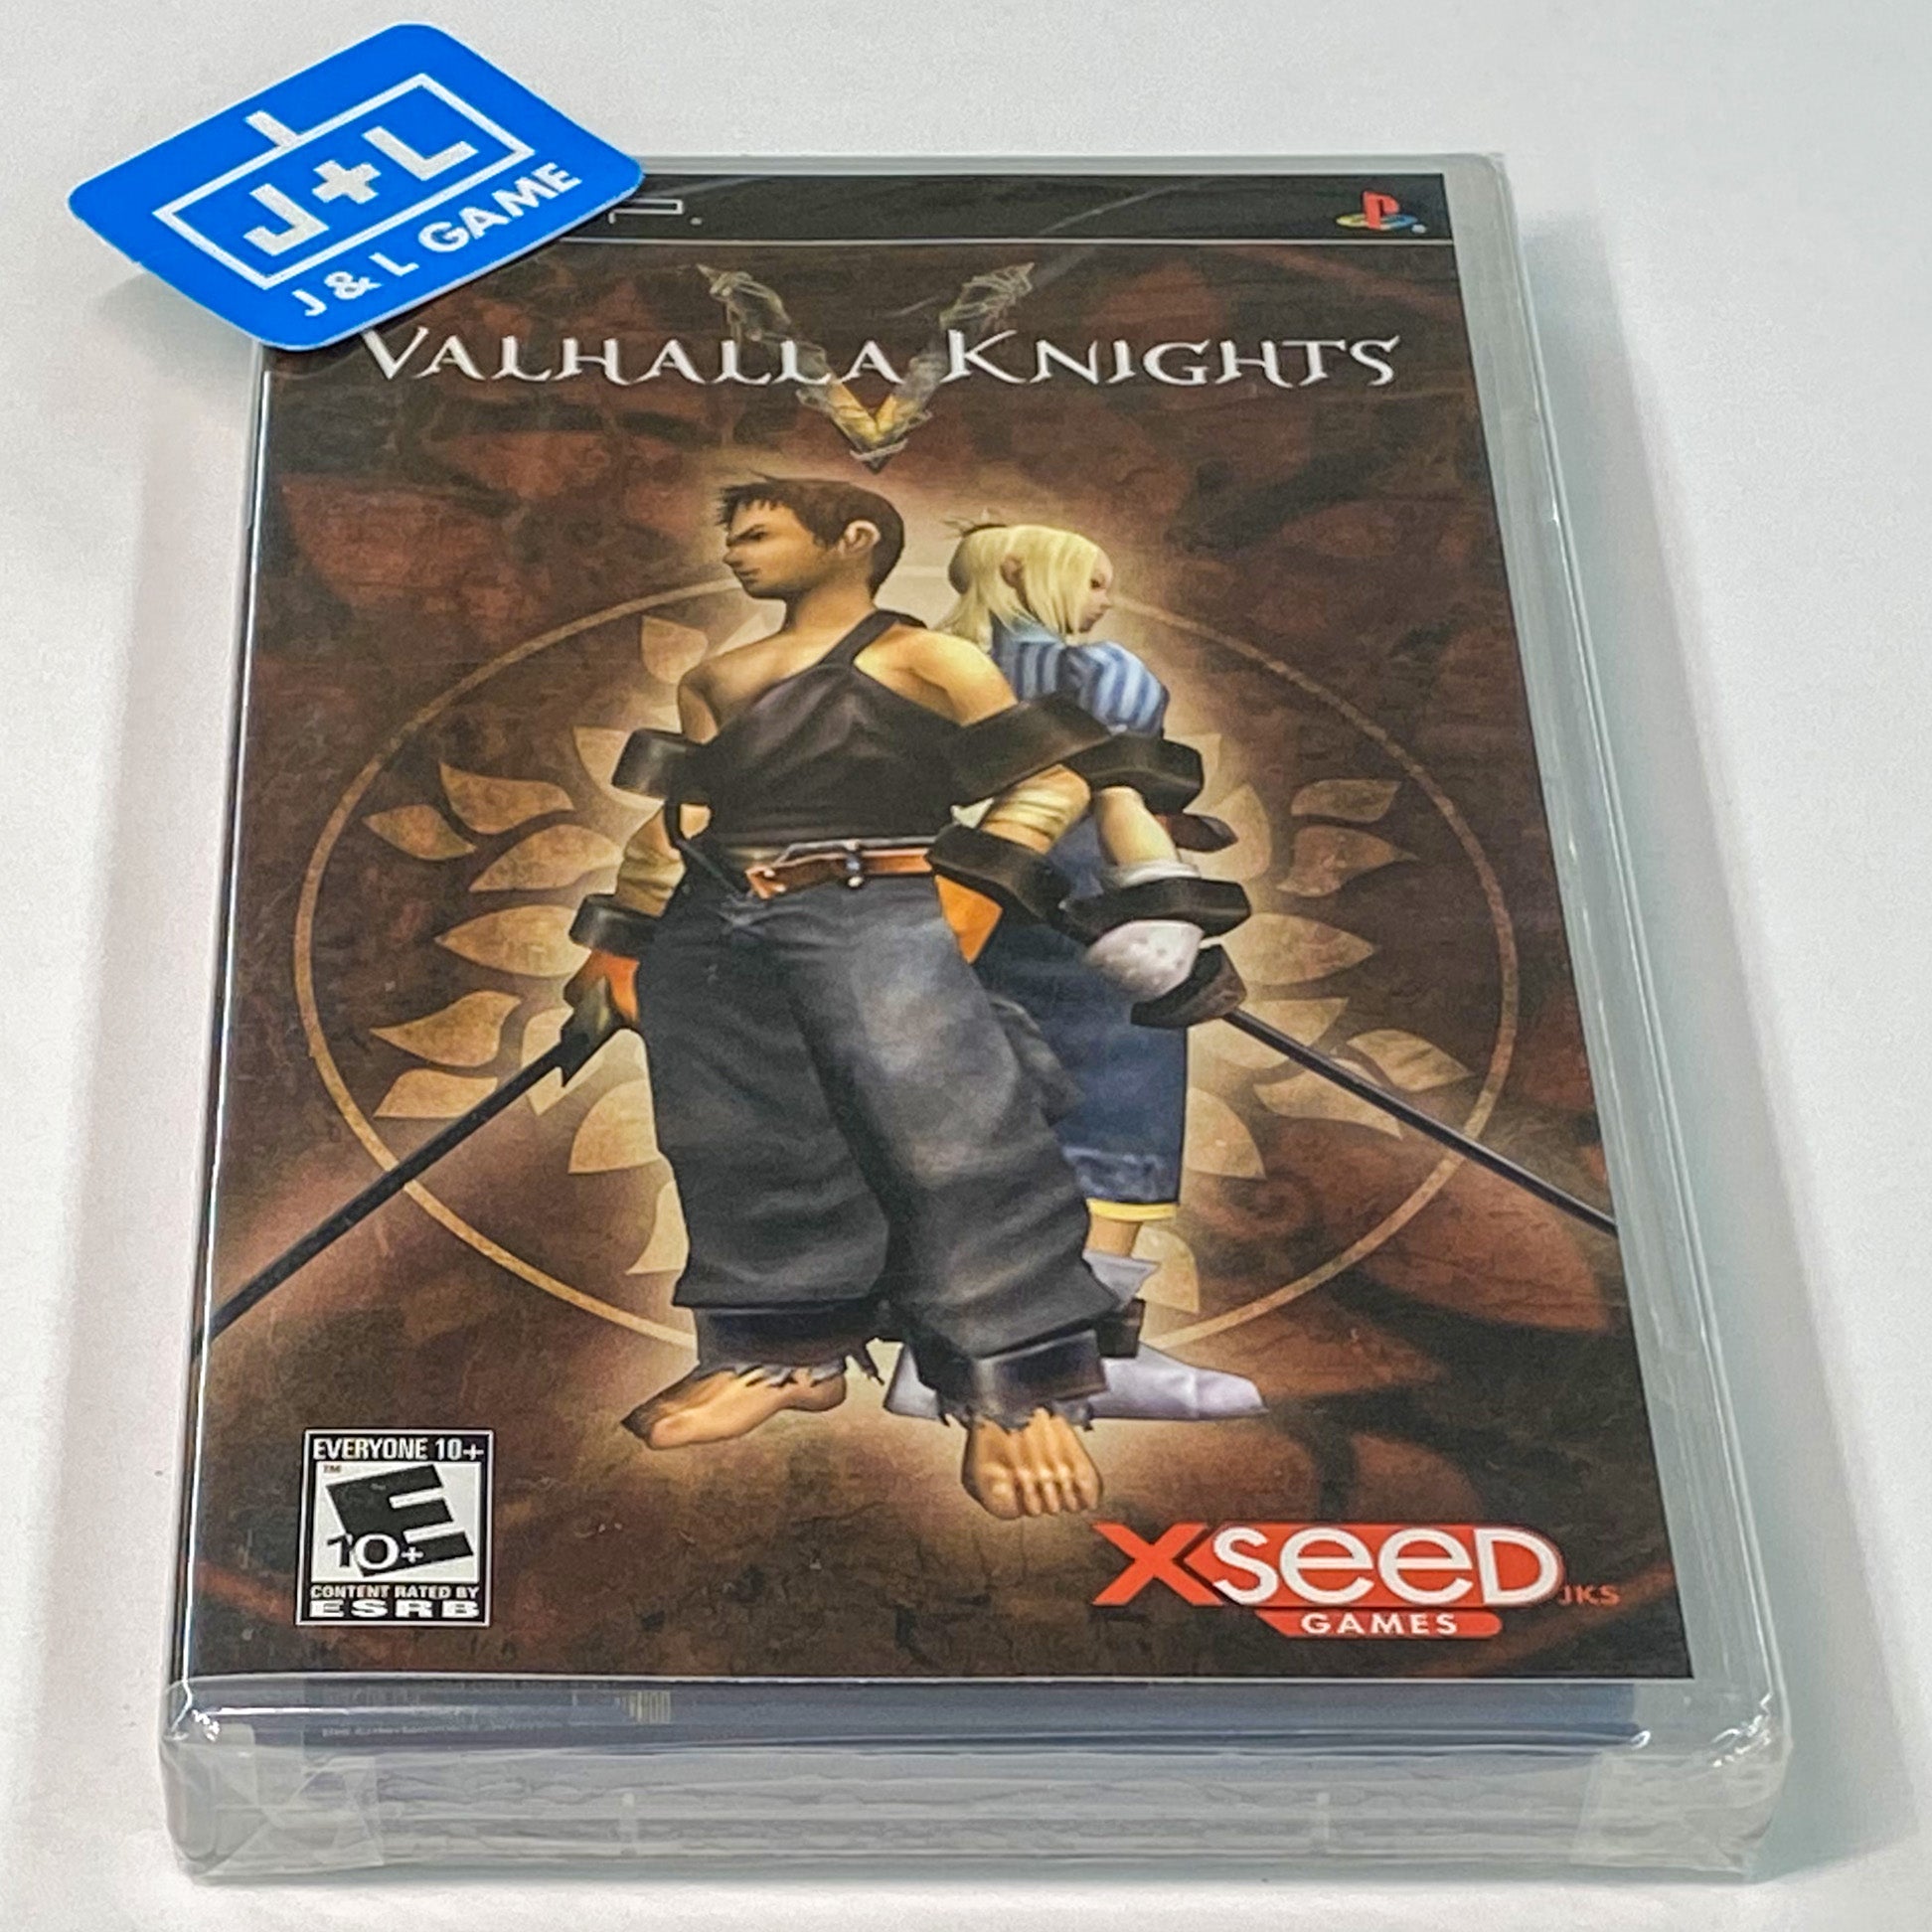 Valhalla Knights - Sony PSP Video Games Xseed Games   